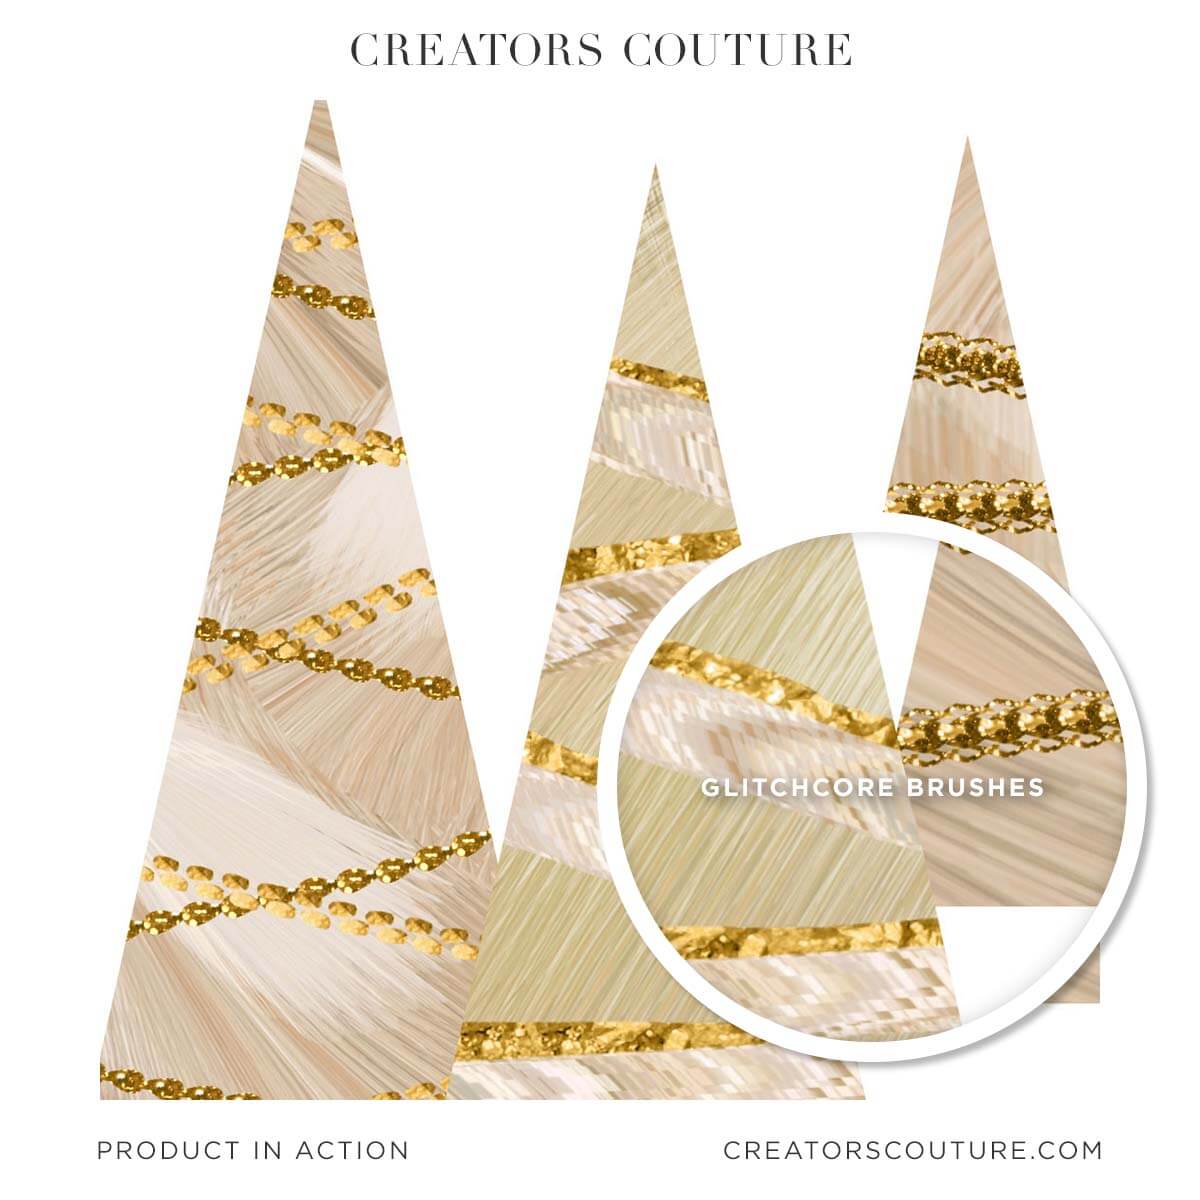 Abstract cream and beige Christmas tree illustrations with glitch and line effect, Photoshop brushes and gold accents